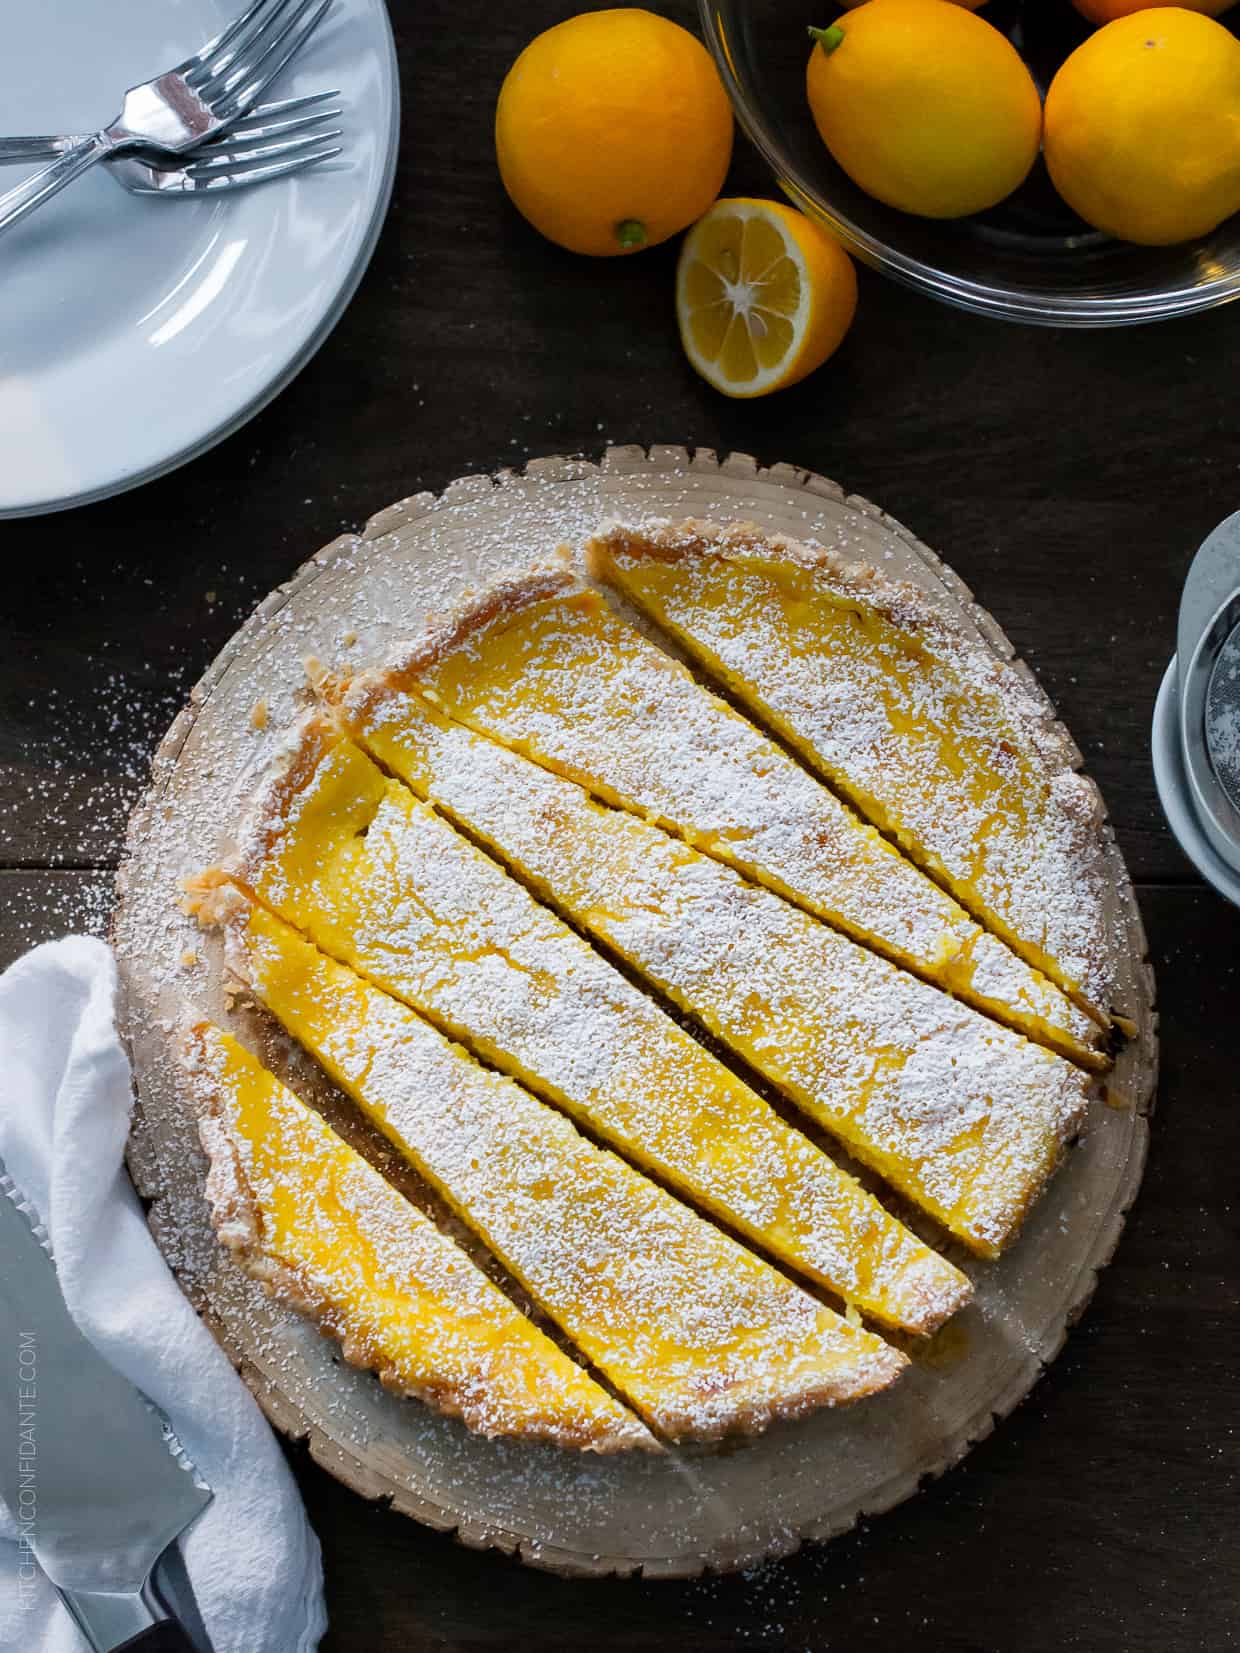 A Meyer Lemon Tart on a serving platter, sliced and dusted with powdered sugar.